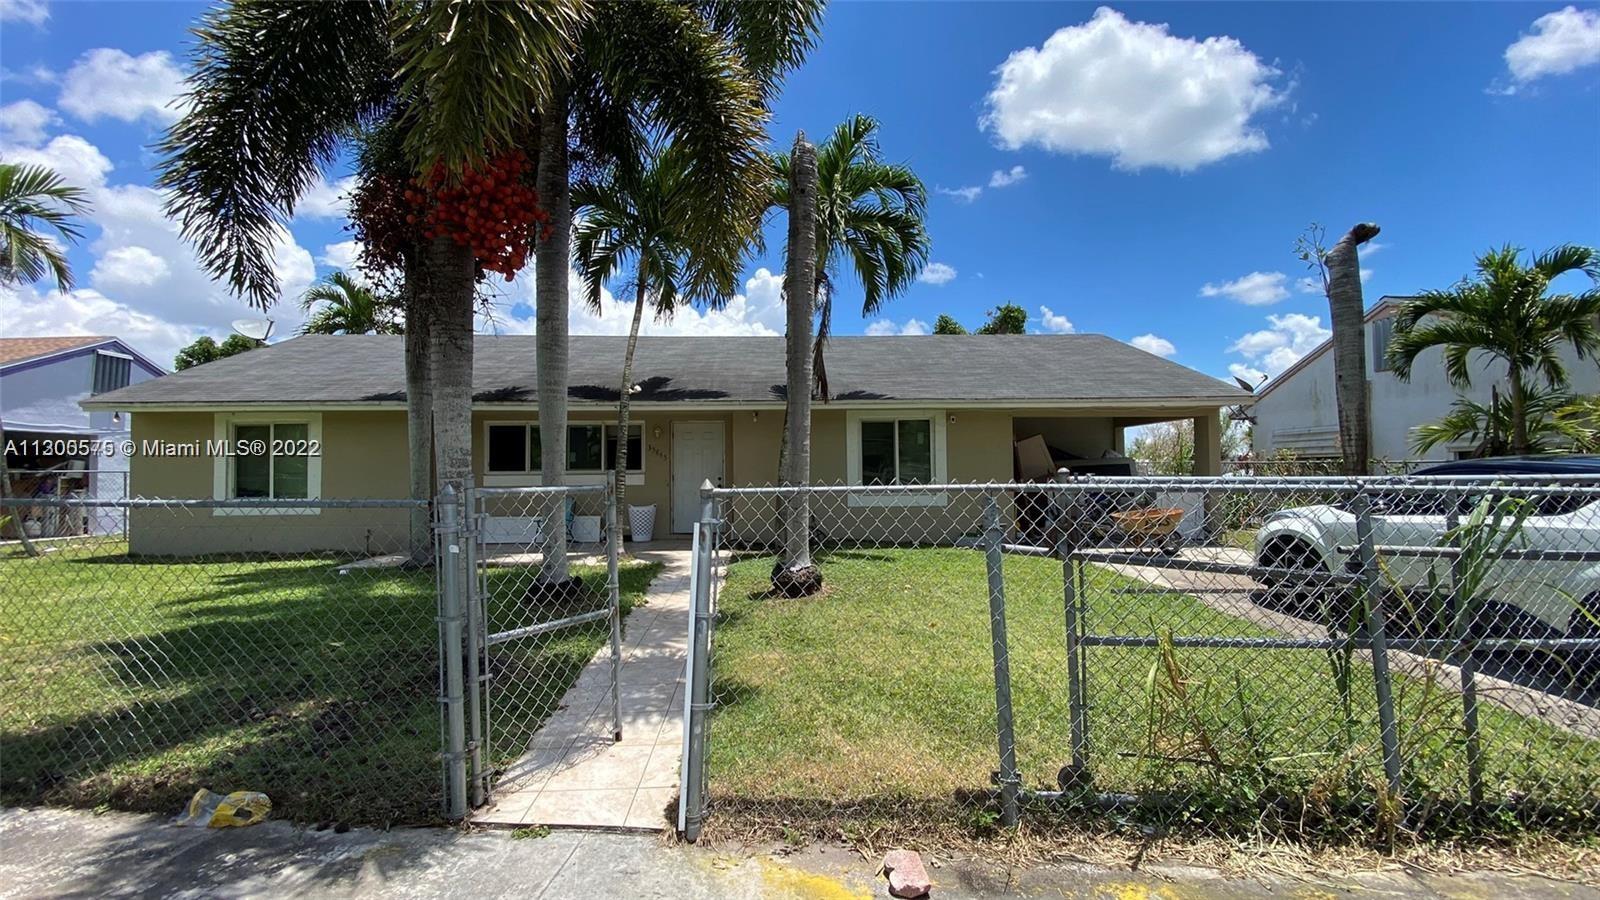 This property is located in the Centro Villas Sub-division in close proximity to local schools, commercial corridors, Fla Keys, and Fla turnpike. The property features 4 Bedrooms 2 Bathrooms with tile flooring throughout. The spacious backyard is great for family entertainment and for pets to enjoy. ***Showing only Sundays between 11-3pm.